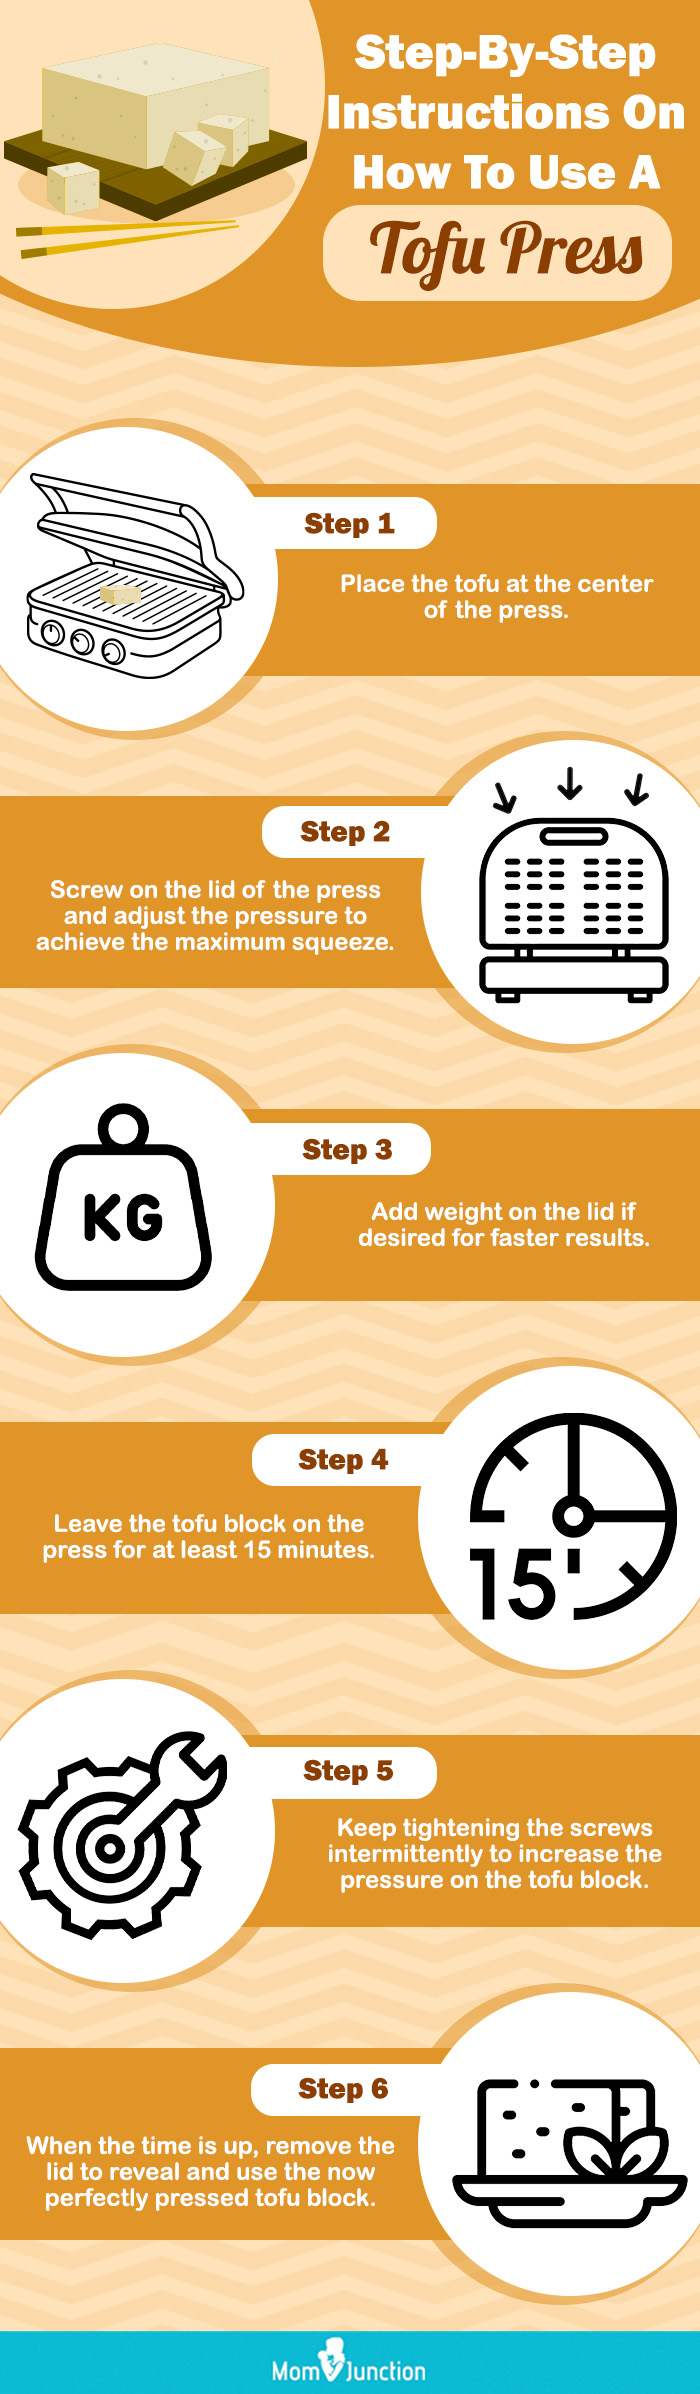 Step-By-Step Instructions On How To Use A Tofu Press (infographic)